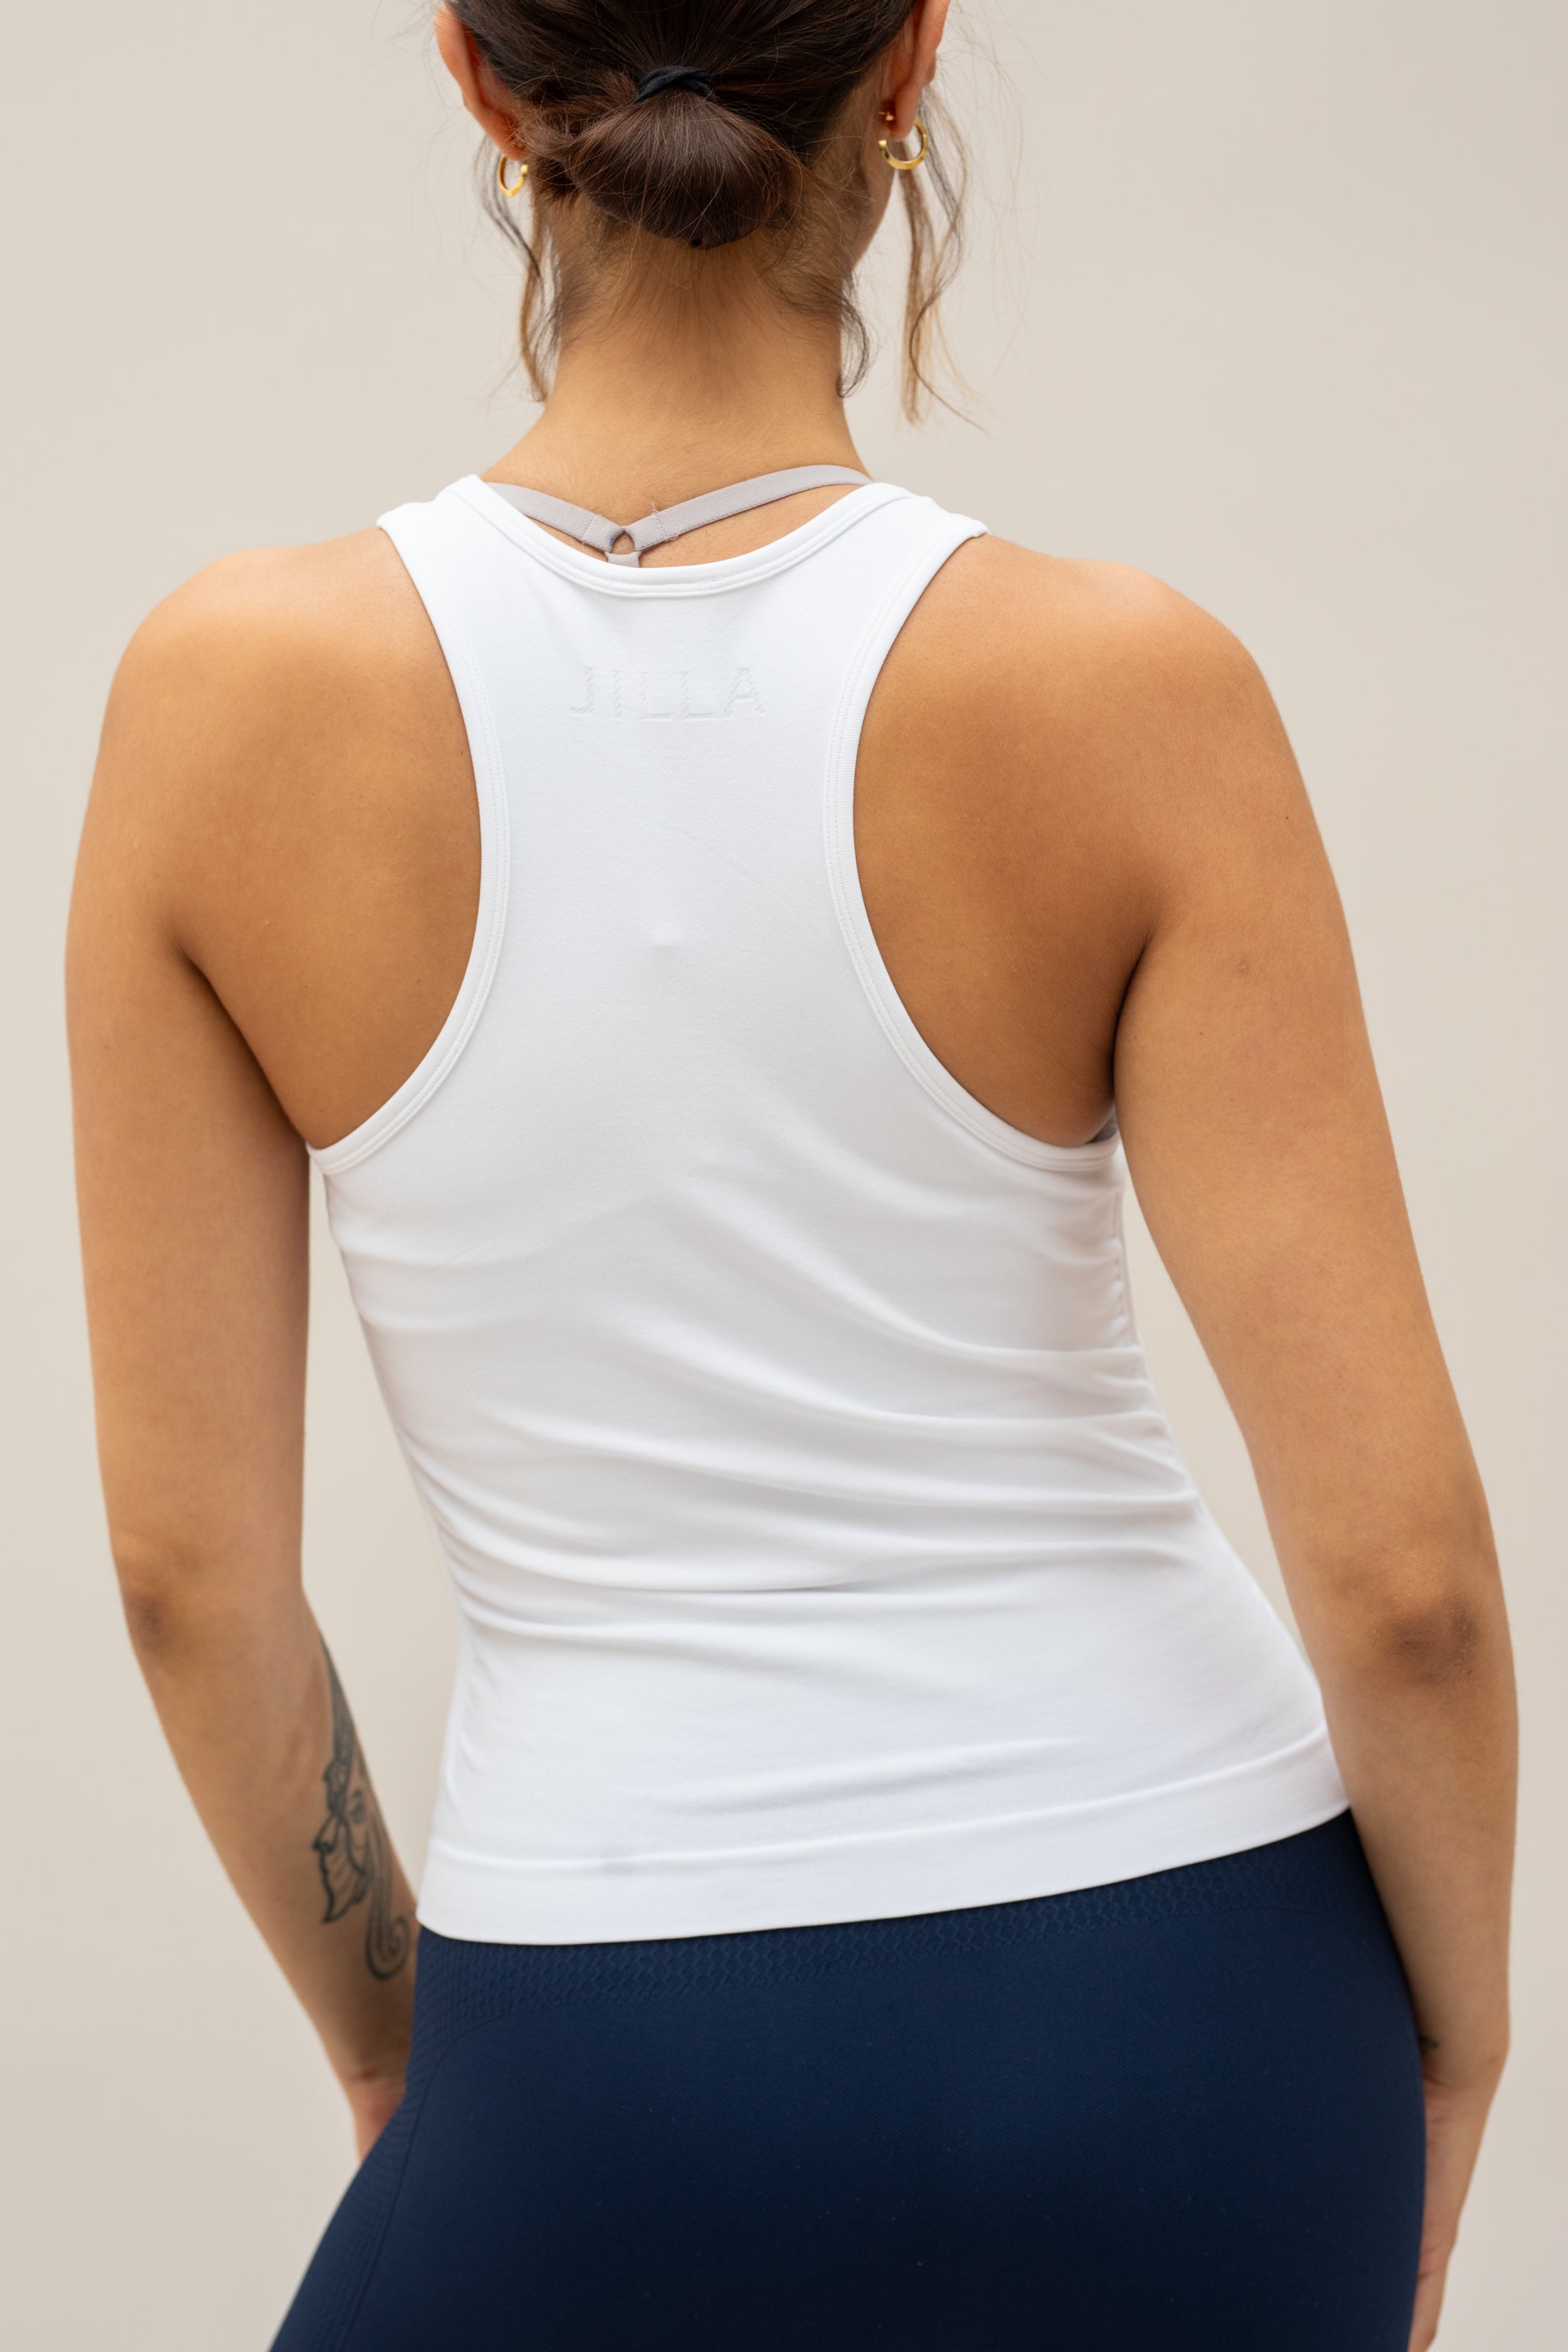 White seamless recycled moisture wicking sleeveless tank top with side ruching for yoga, pilates, gym, cycling, running and exercise by sustainable activewear brand Jilla Active